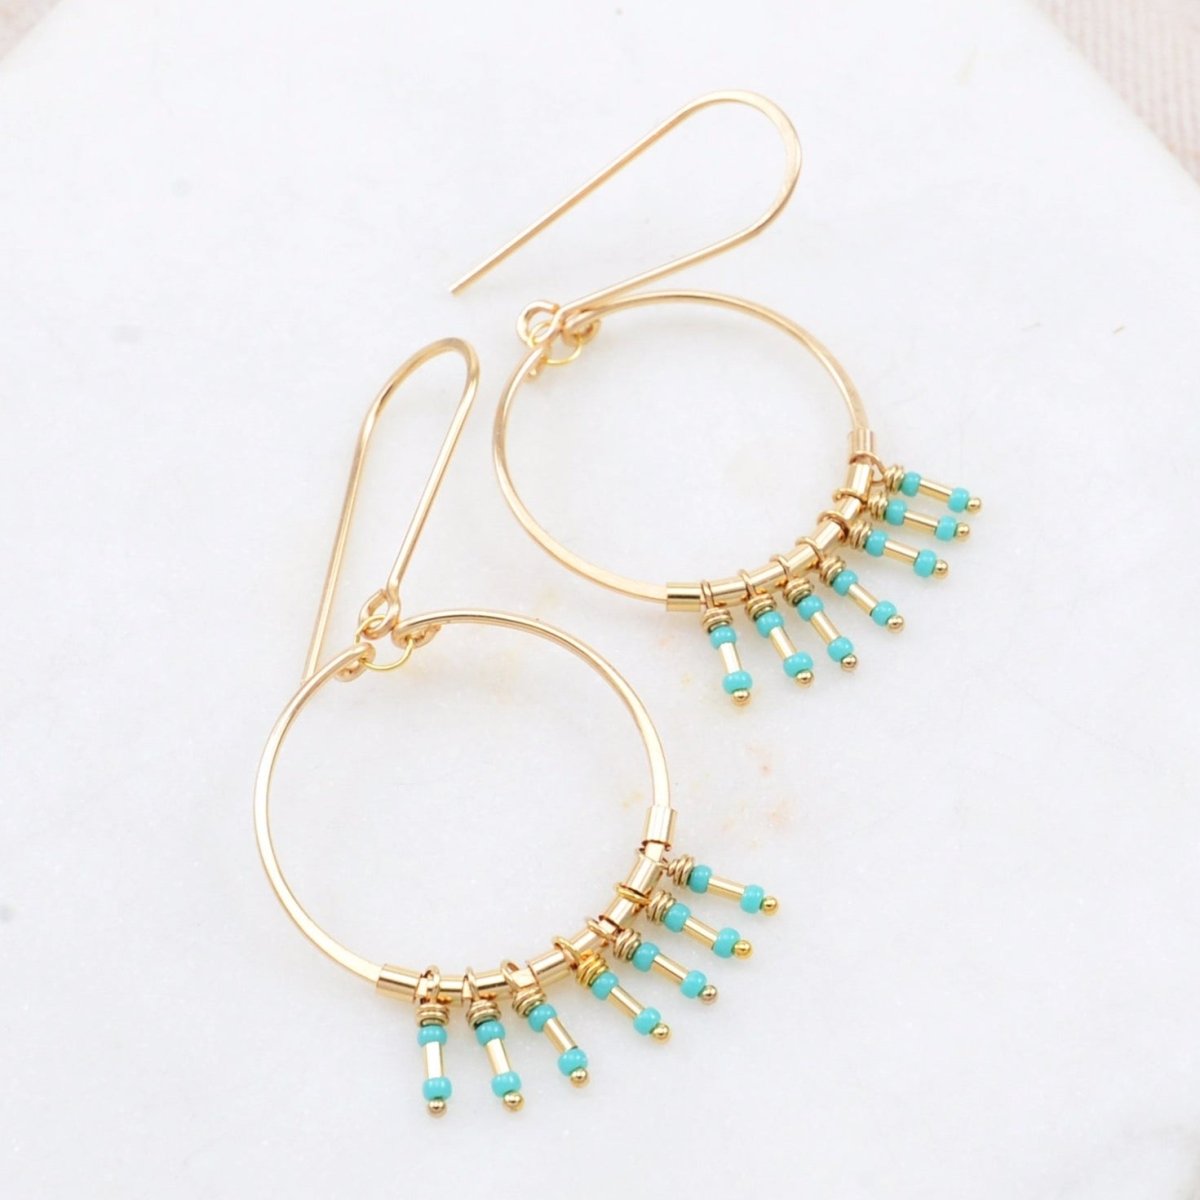 Gold-fill hoop earrings with turquoise and gold-fill fringe. The Clarice Earrings in Turquoise is designed and handmade by Amy Olson in Portland, Oregon.